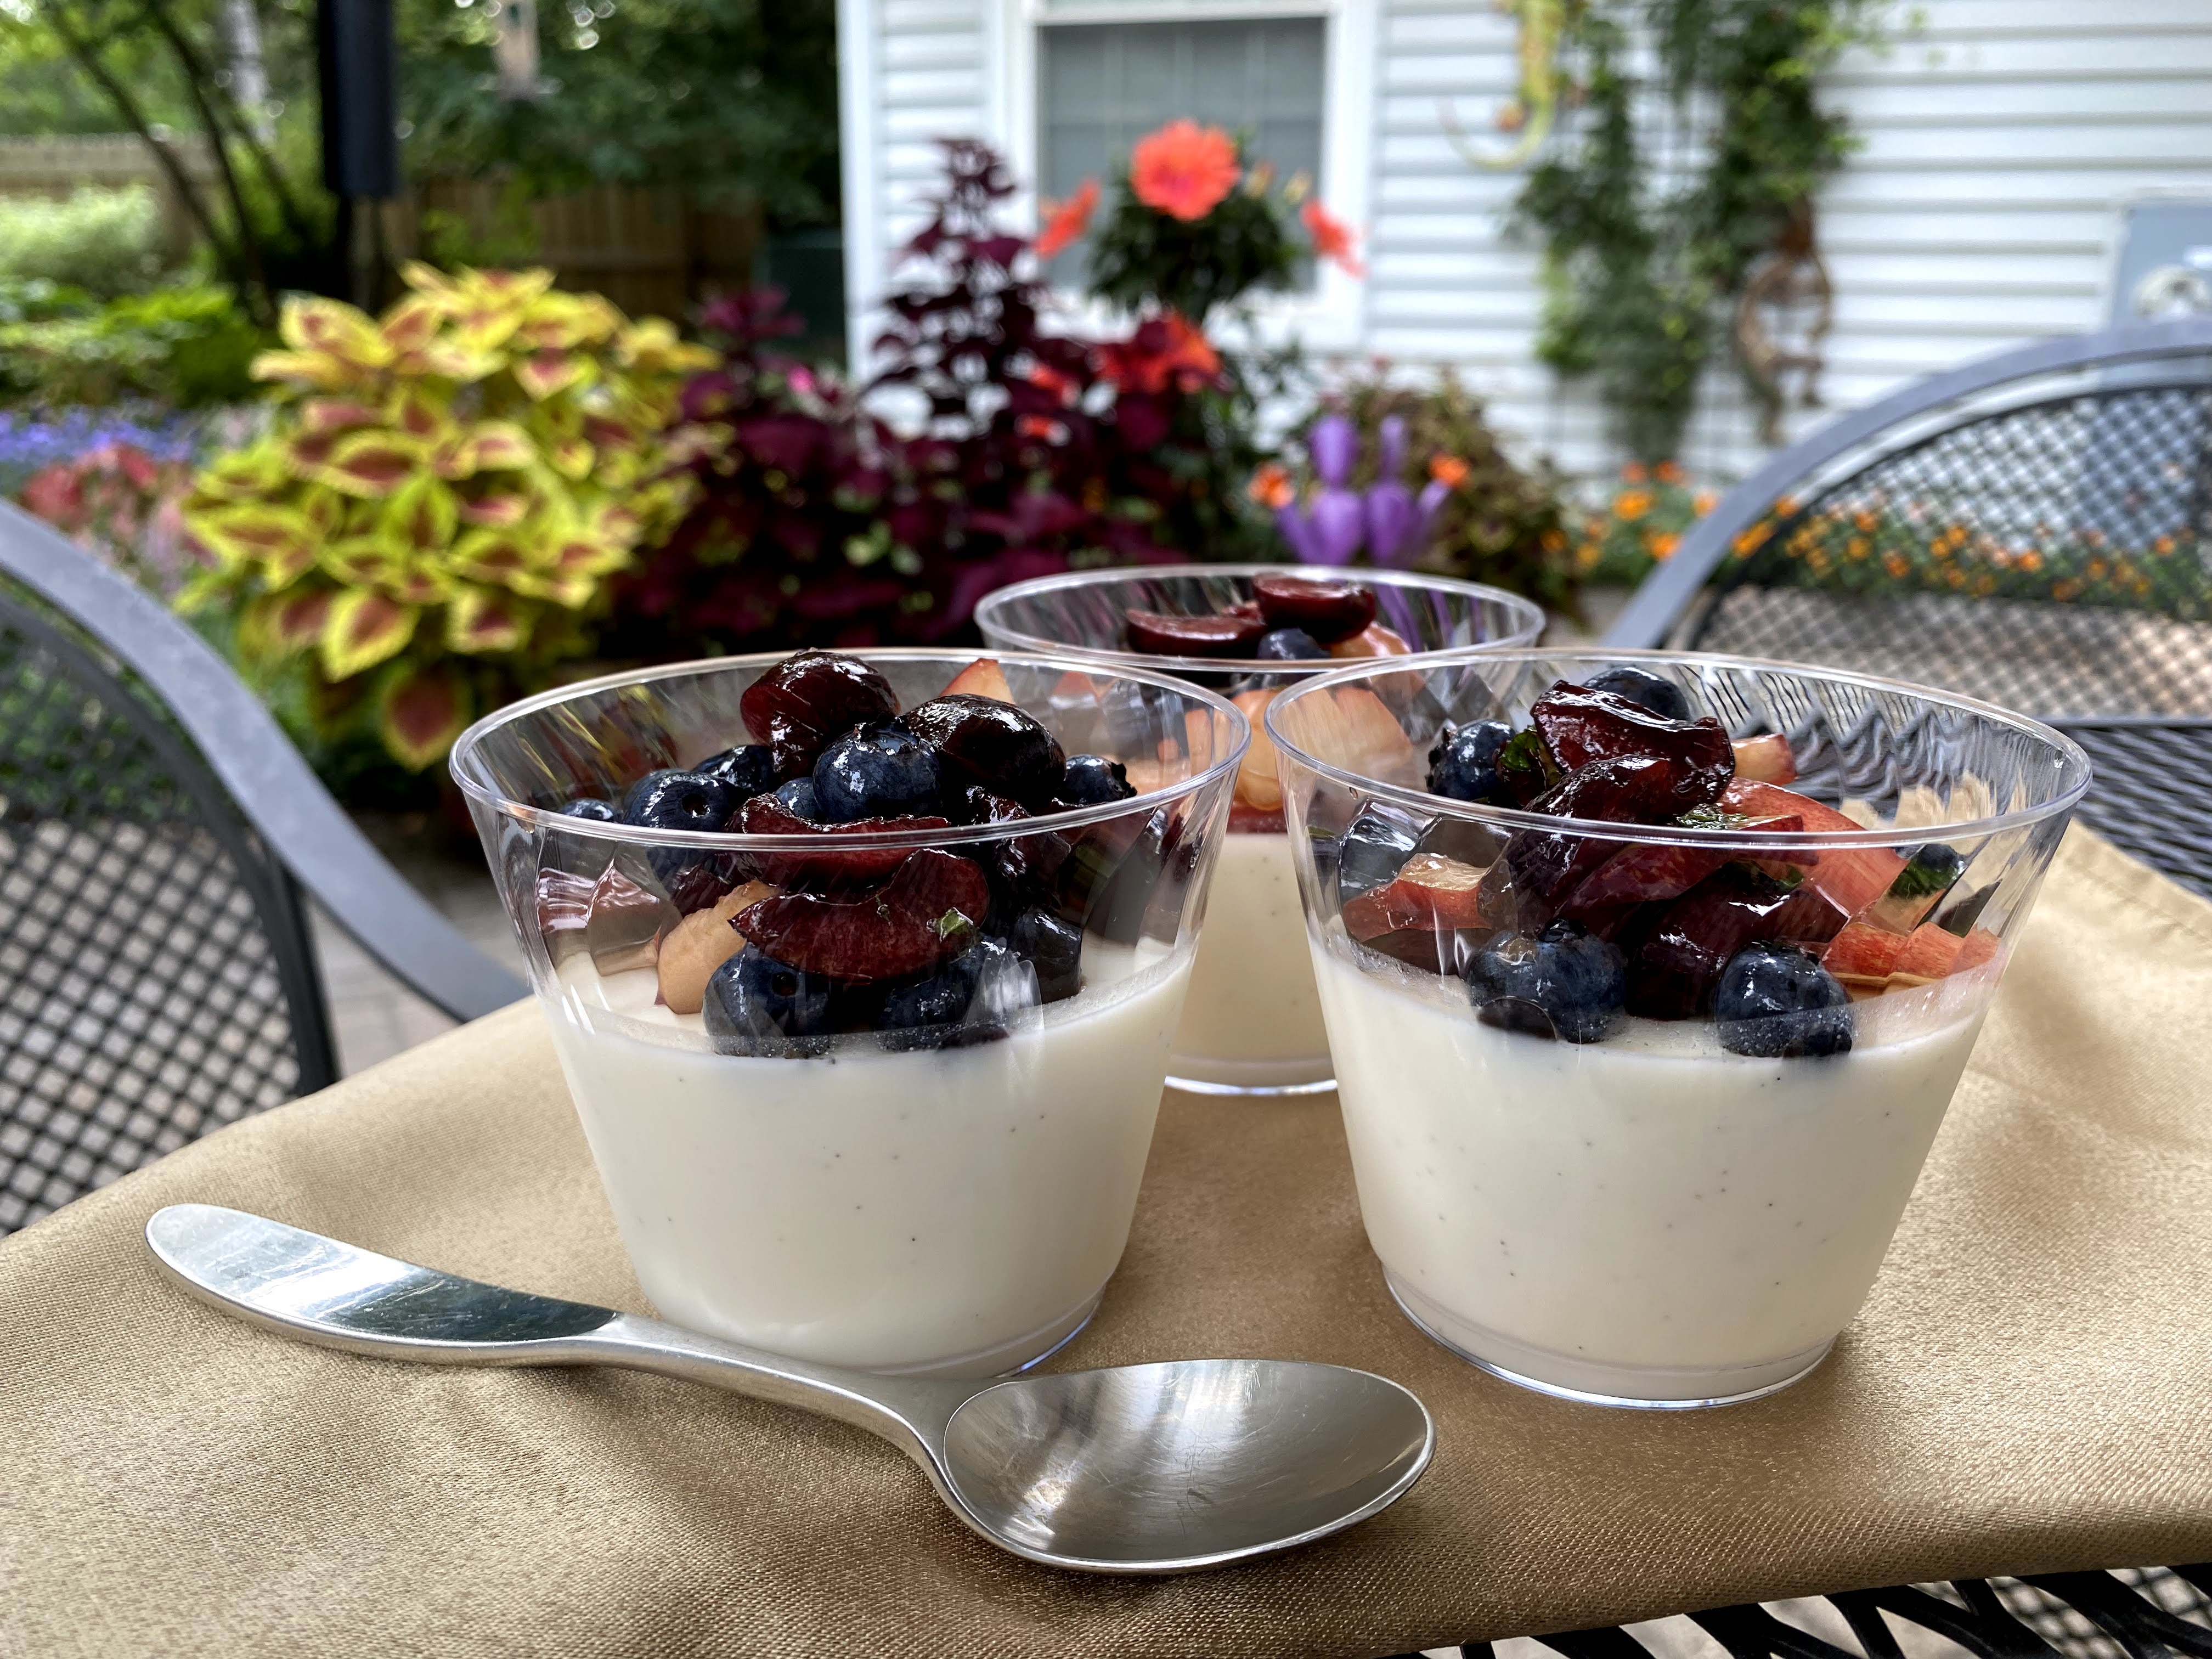 Picnic Panna Cotta with Summer Fruit